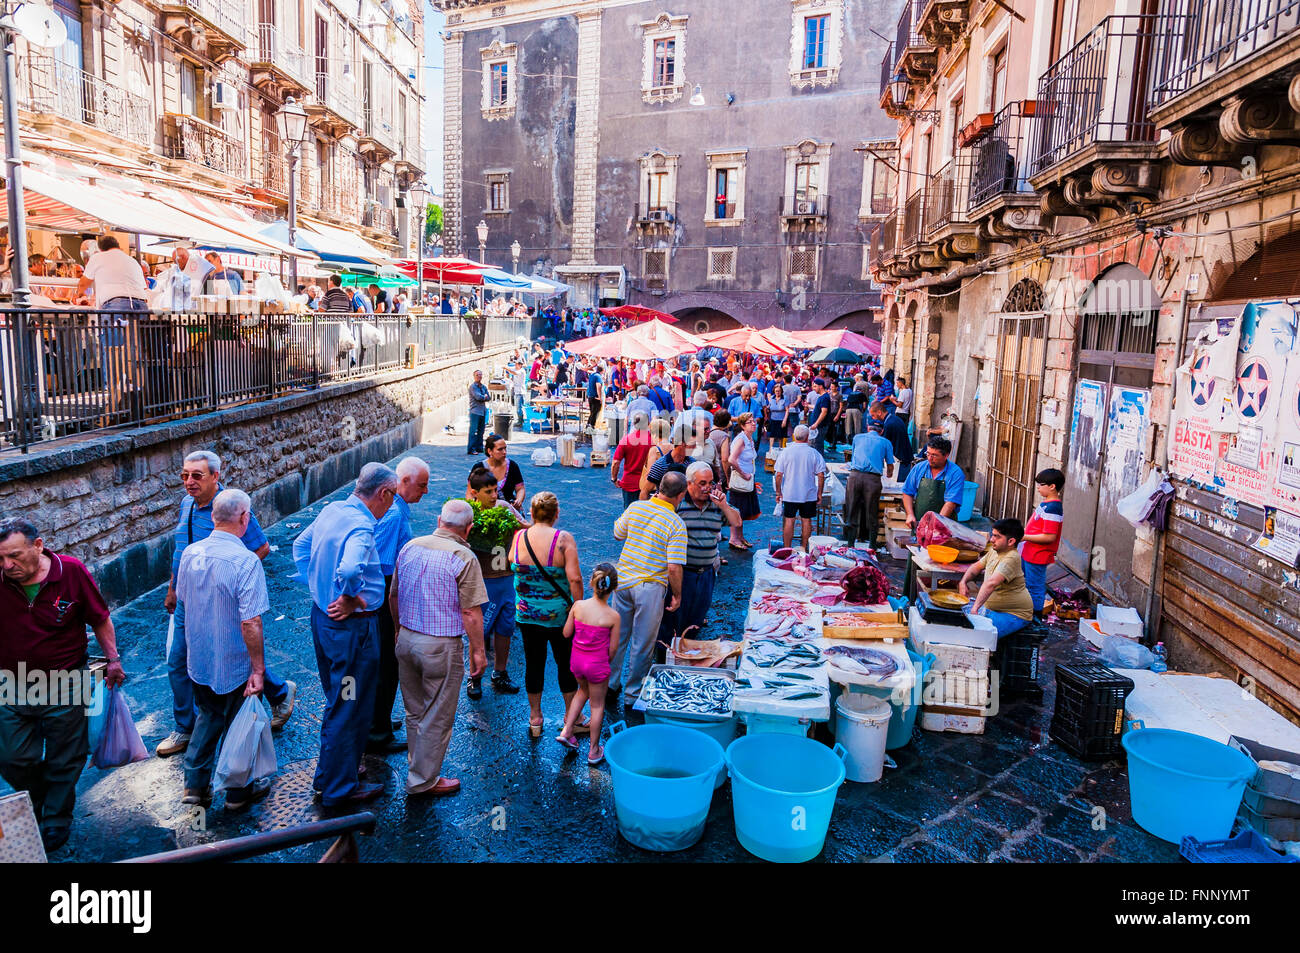 Sellers and buyers on the famous fish market in Catania. Greatest folkloric attractions of the city of Catania, Sicily, Italy Stock Photo